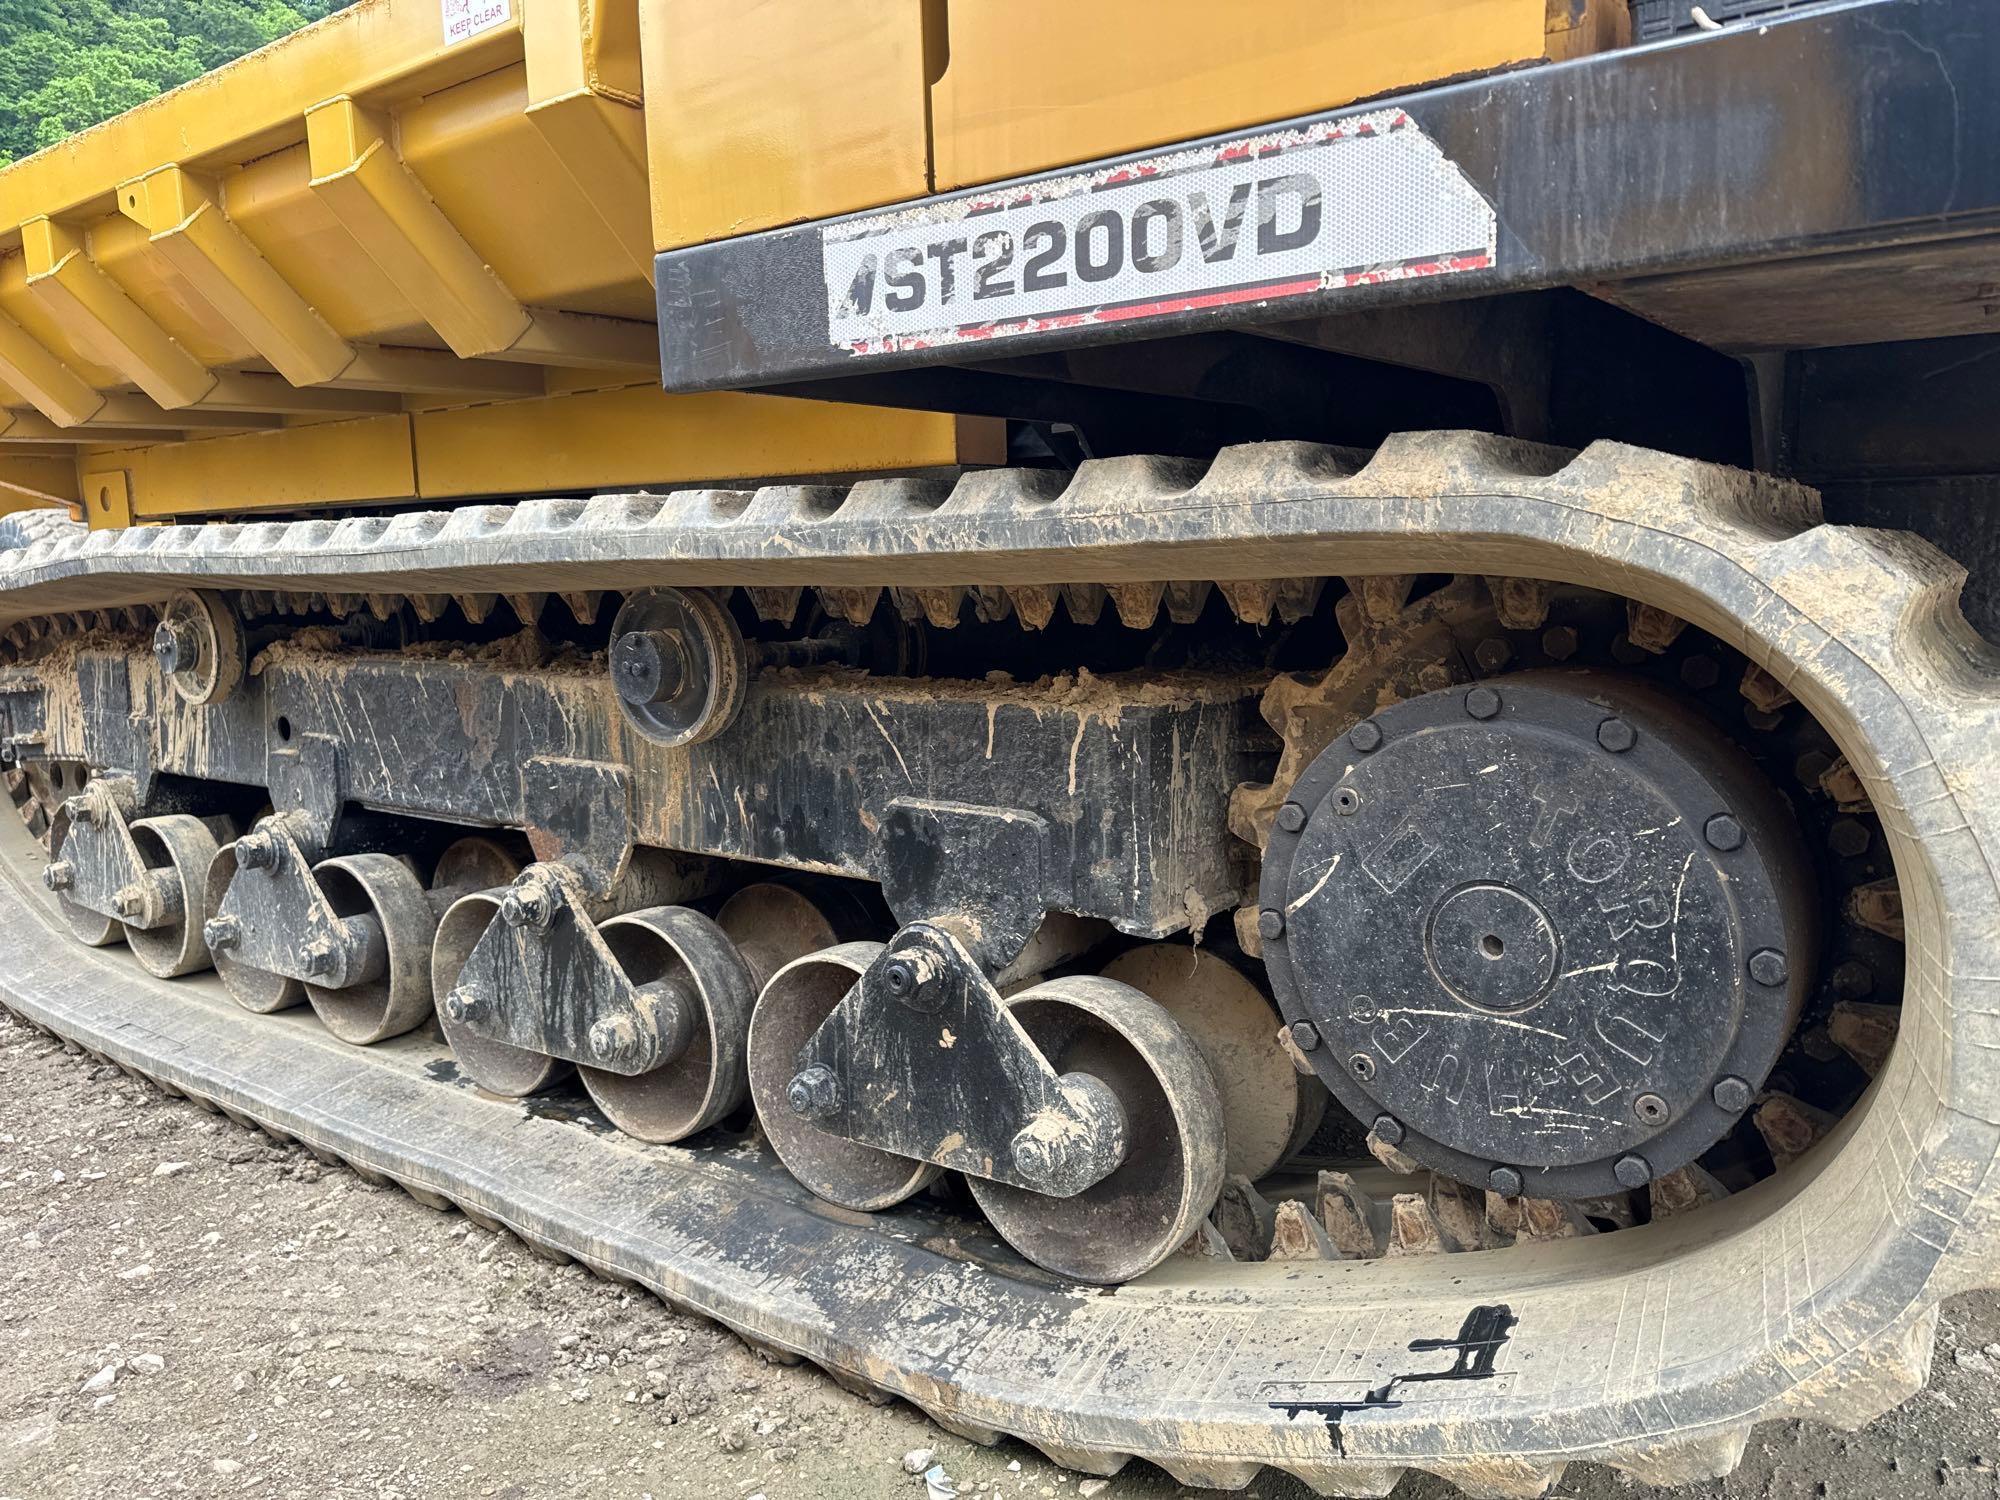 2019 MOROOKA MST2200VD CRAWLER CARRIER SN:A2202235 powered by Cat C7.1 diesel engine, equipped with